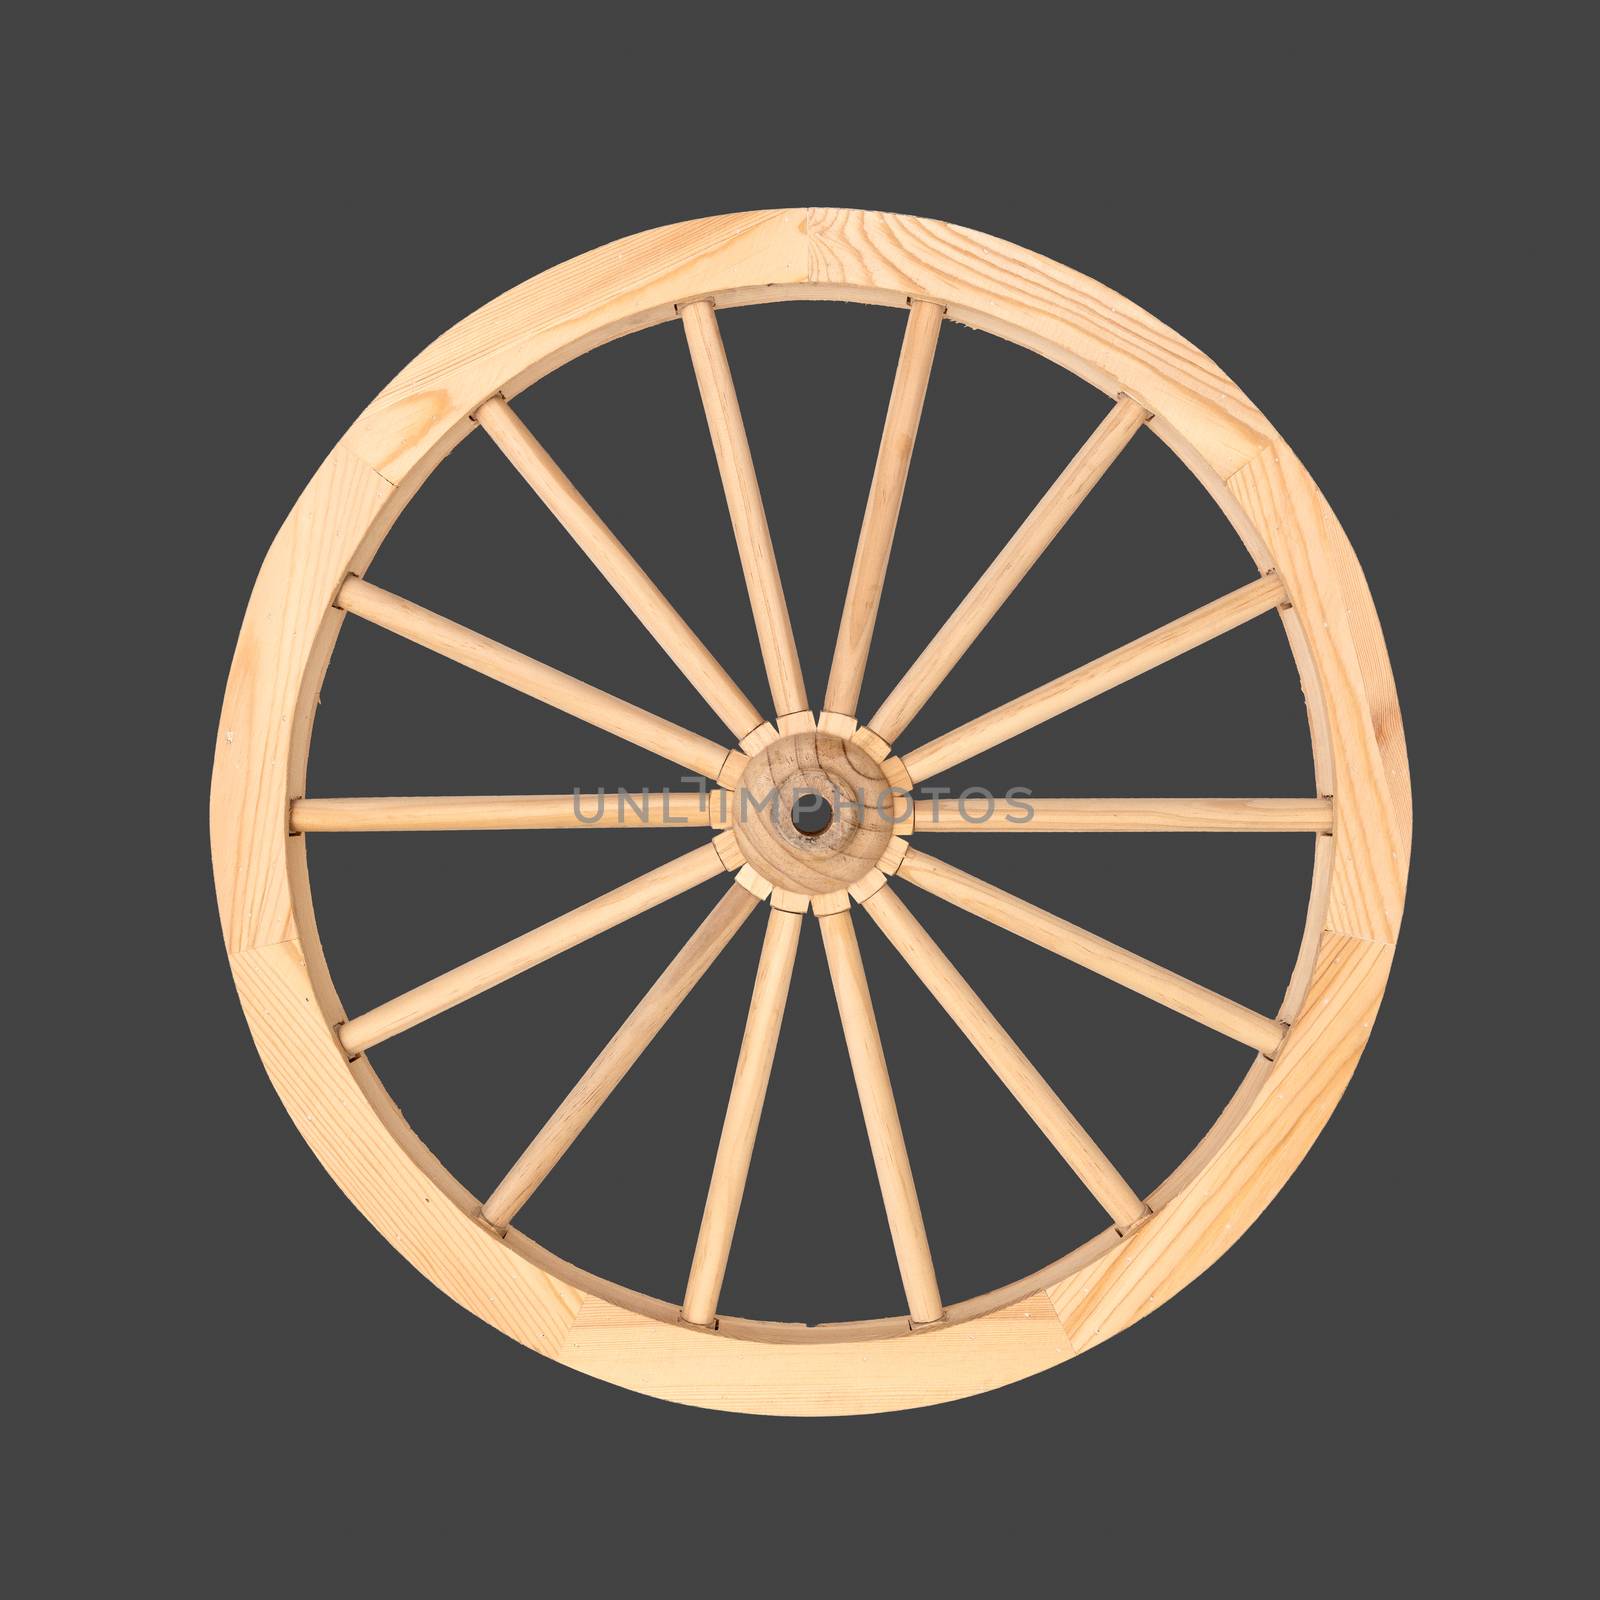 Clean wooden wheel from a cart used for decoration purposes isolated on a gray background.